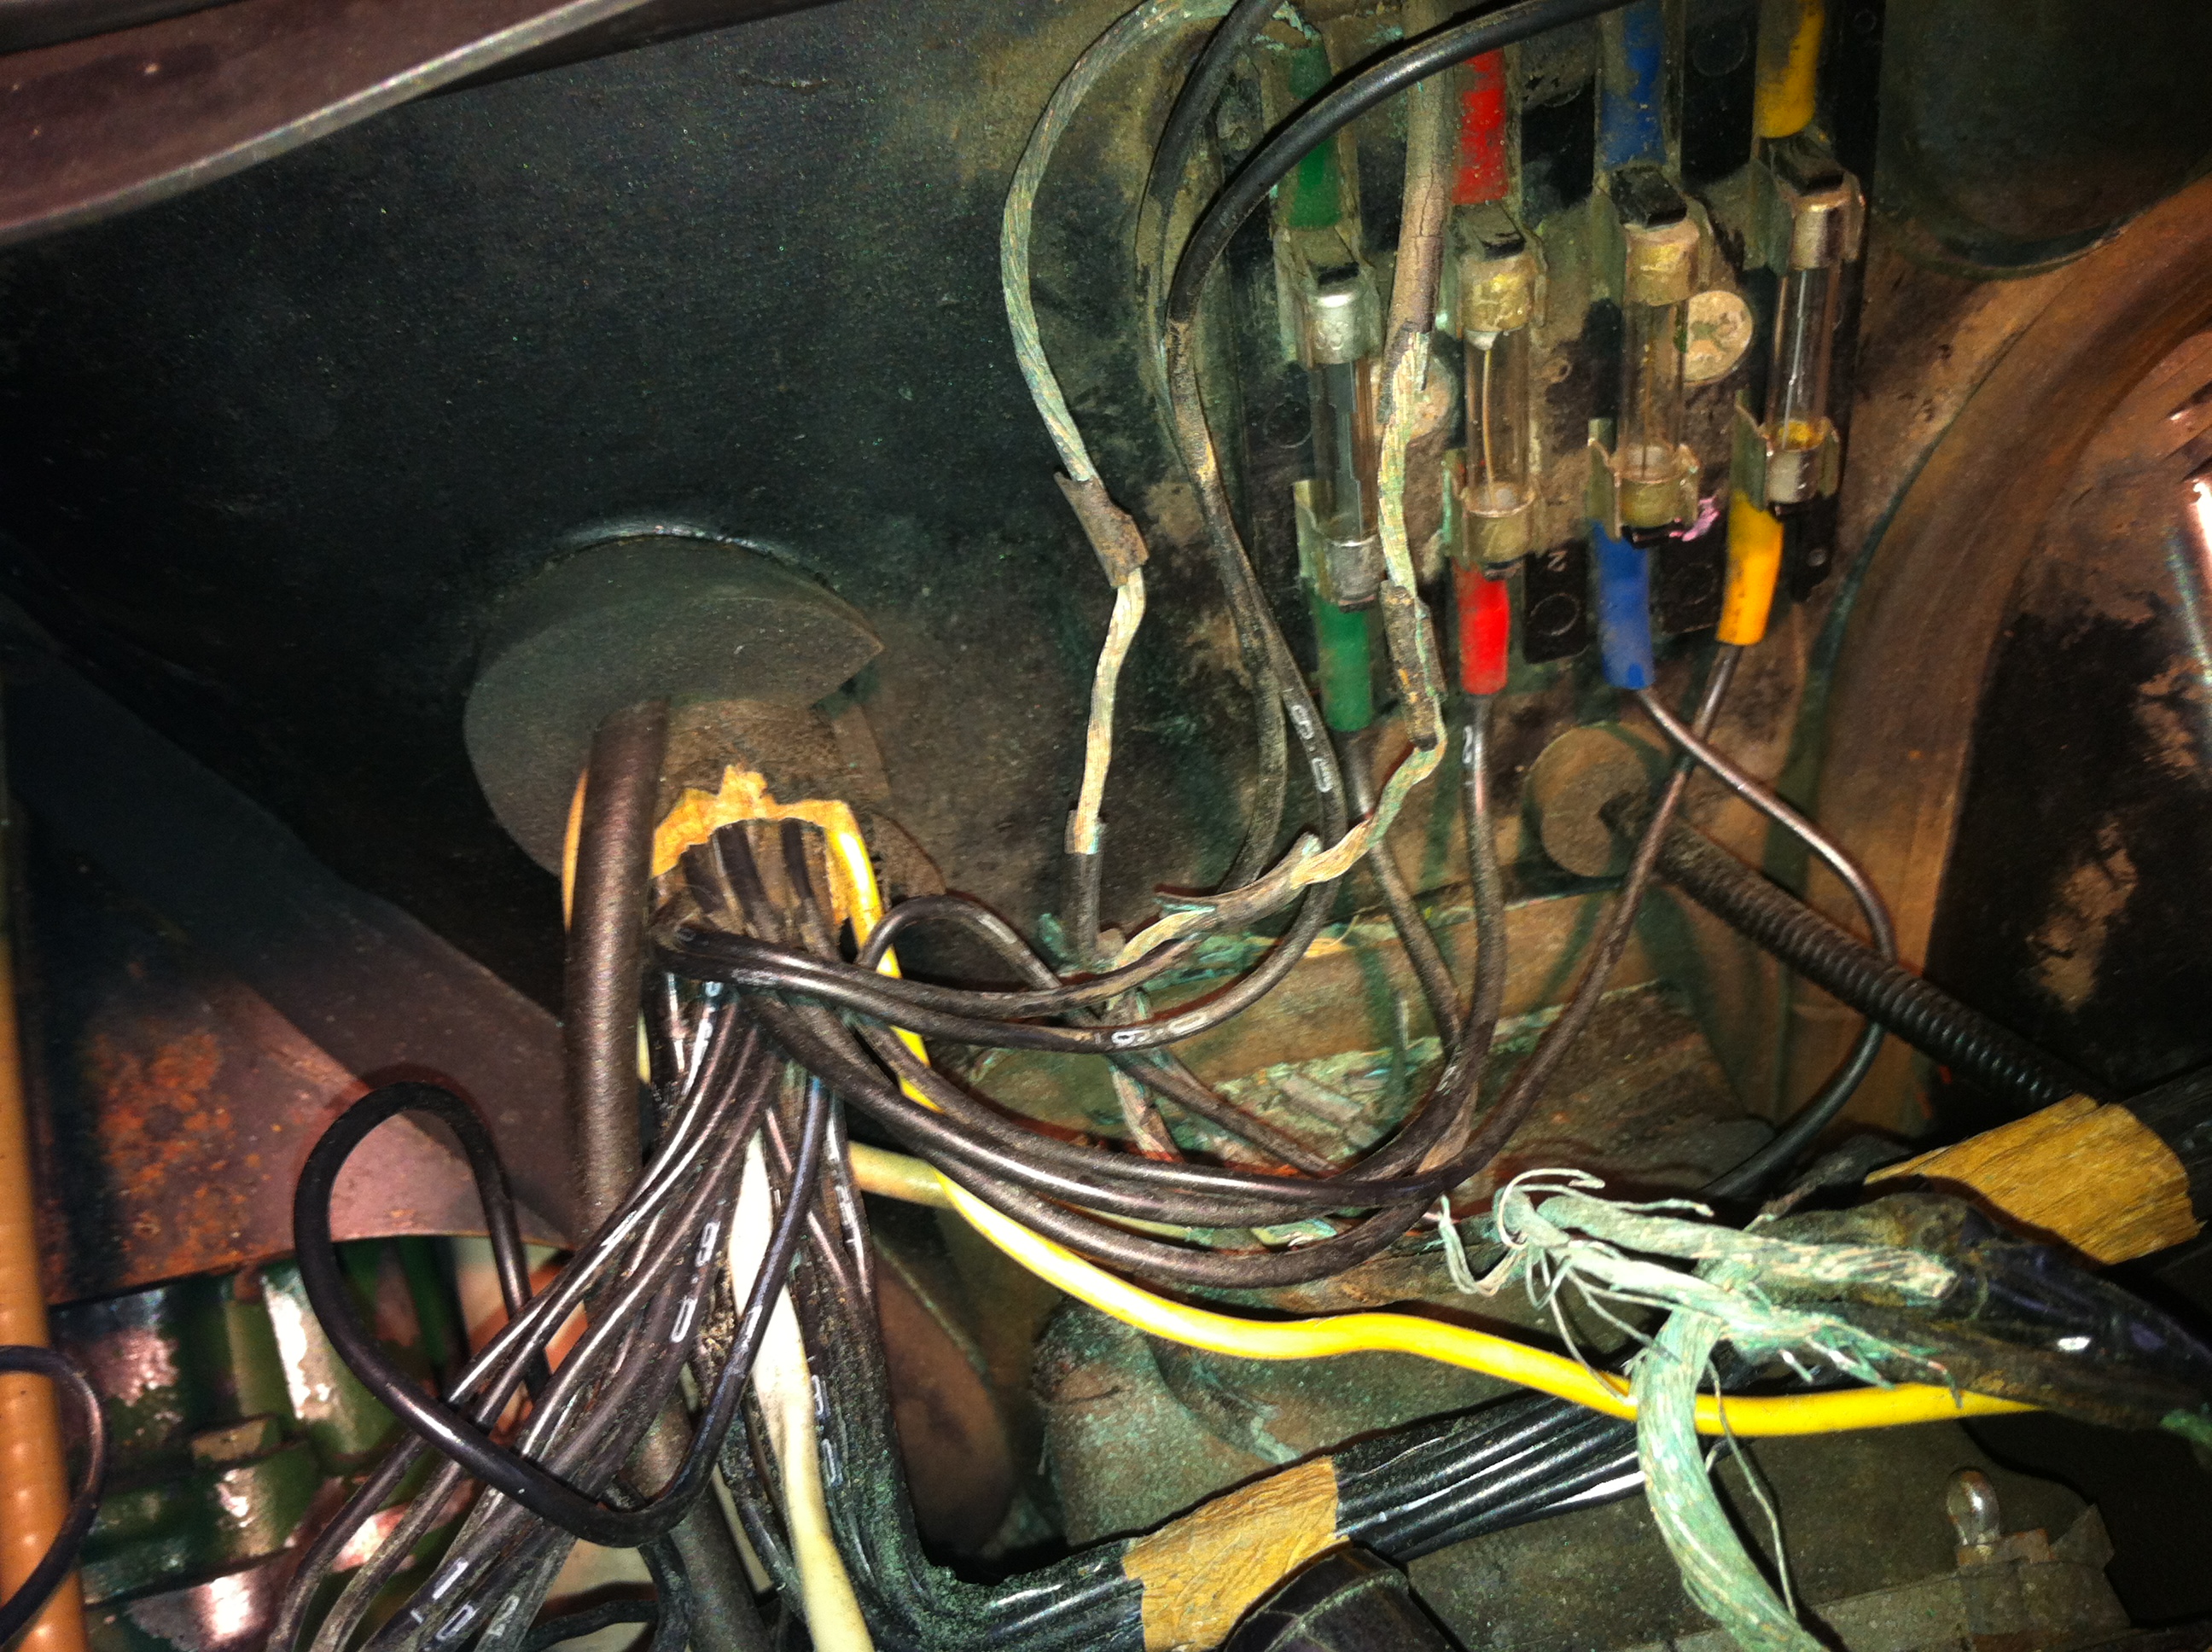 Wiring from the battery to the alternator and fuse panel is completely corroded